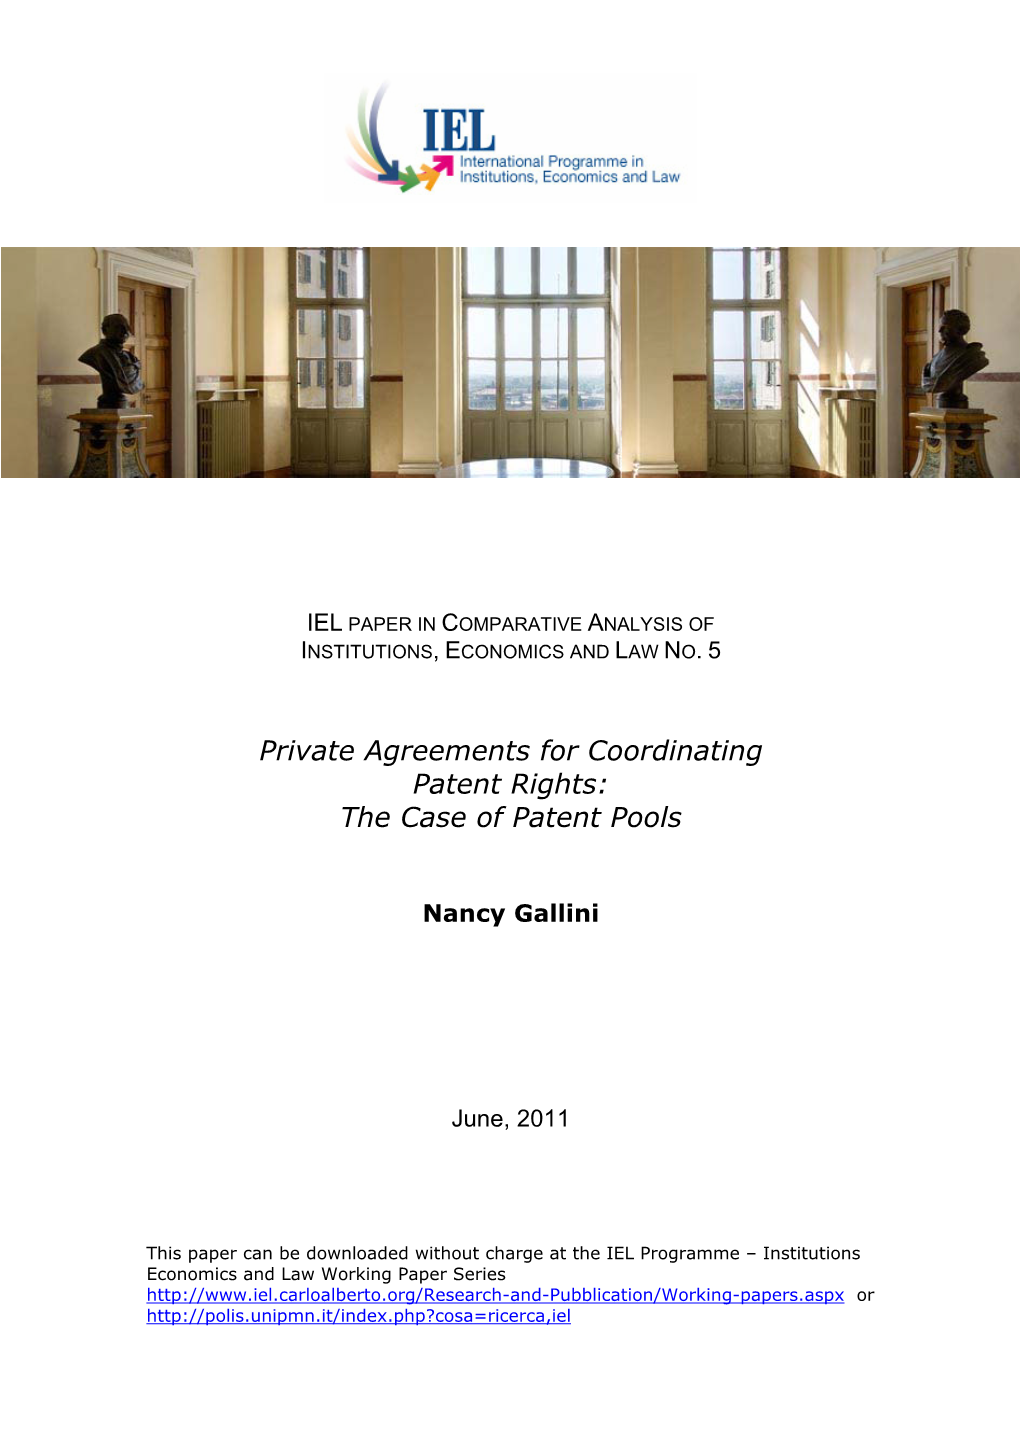 Private Agreements for Coordinating Patent Rights: the Case of Patent Pools